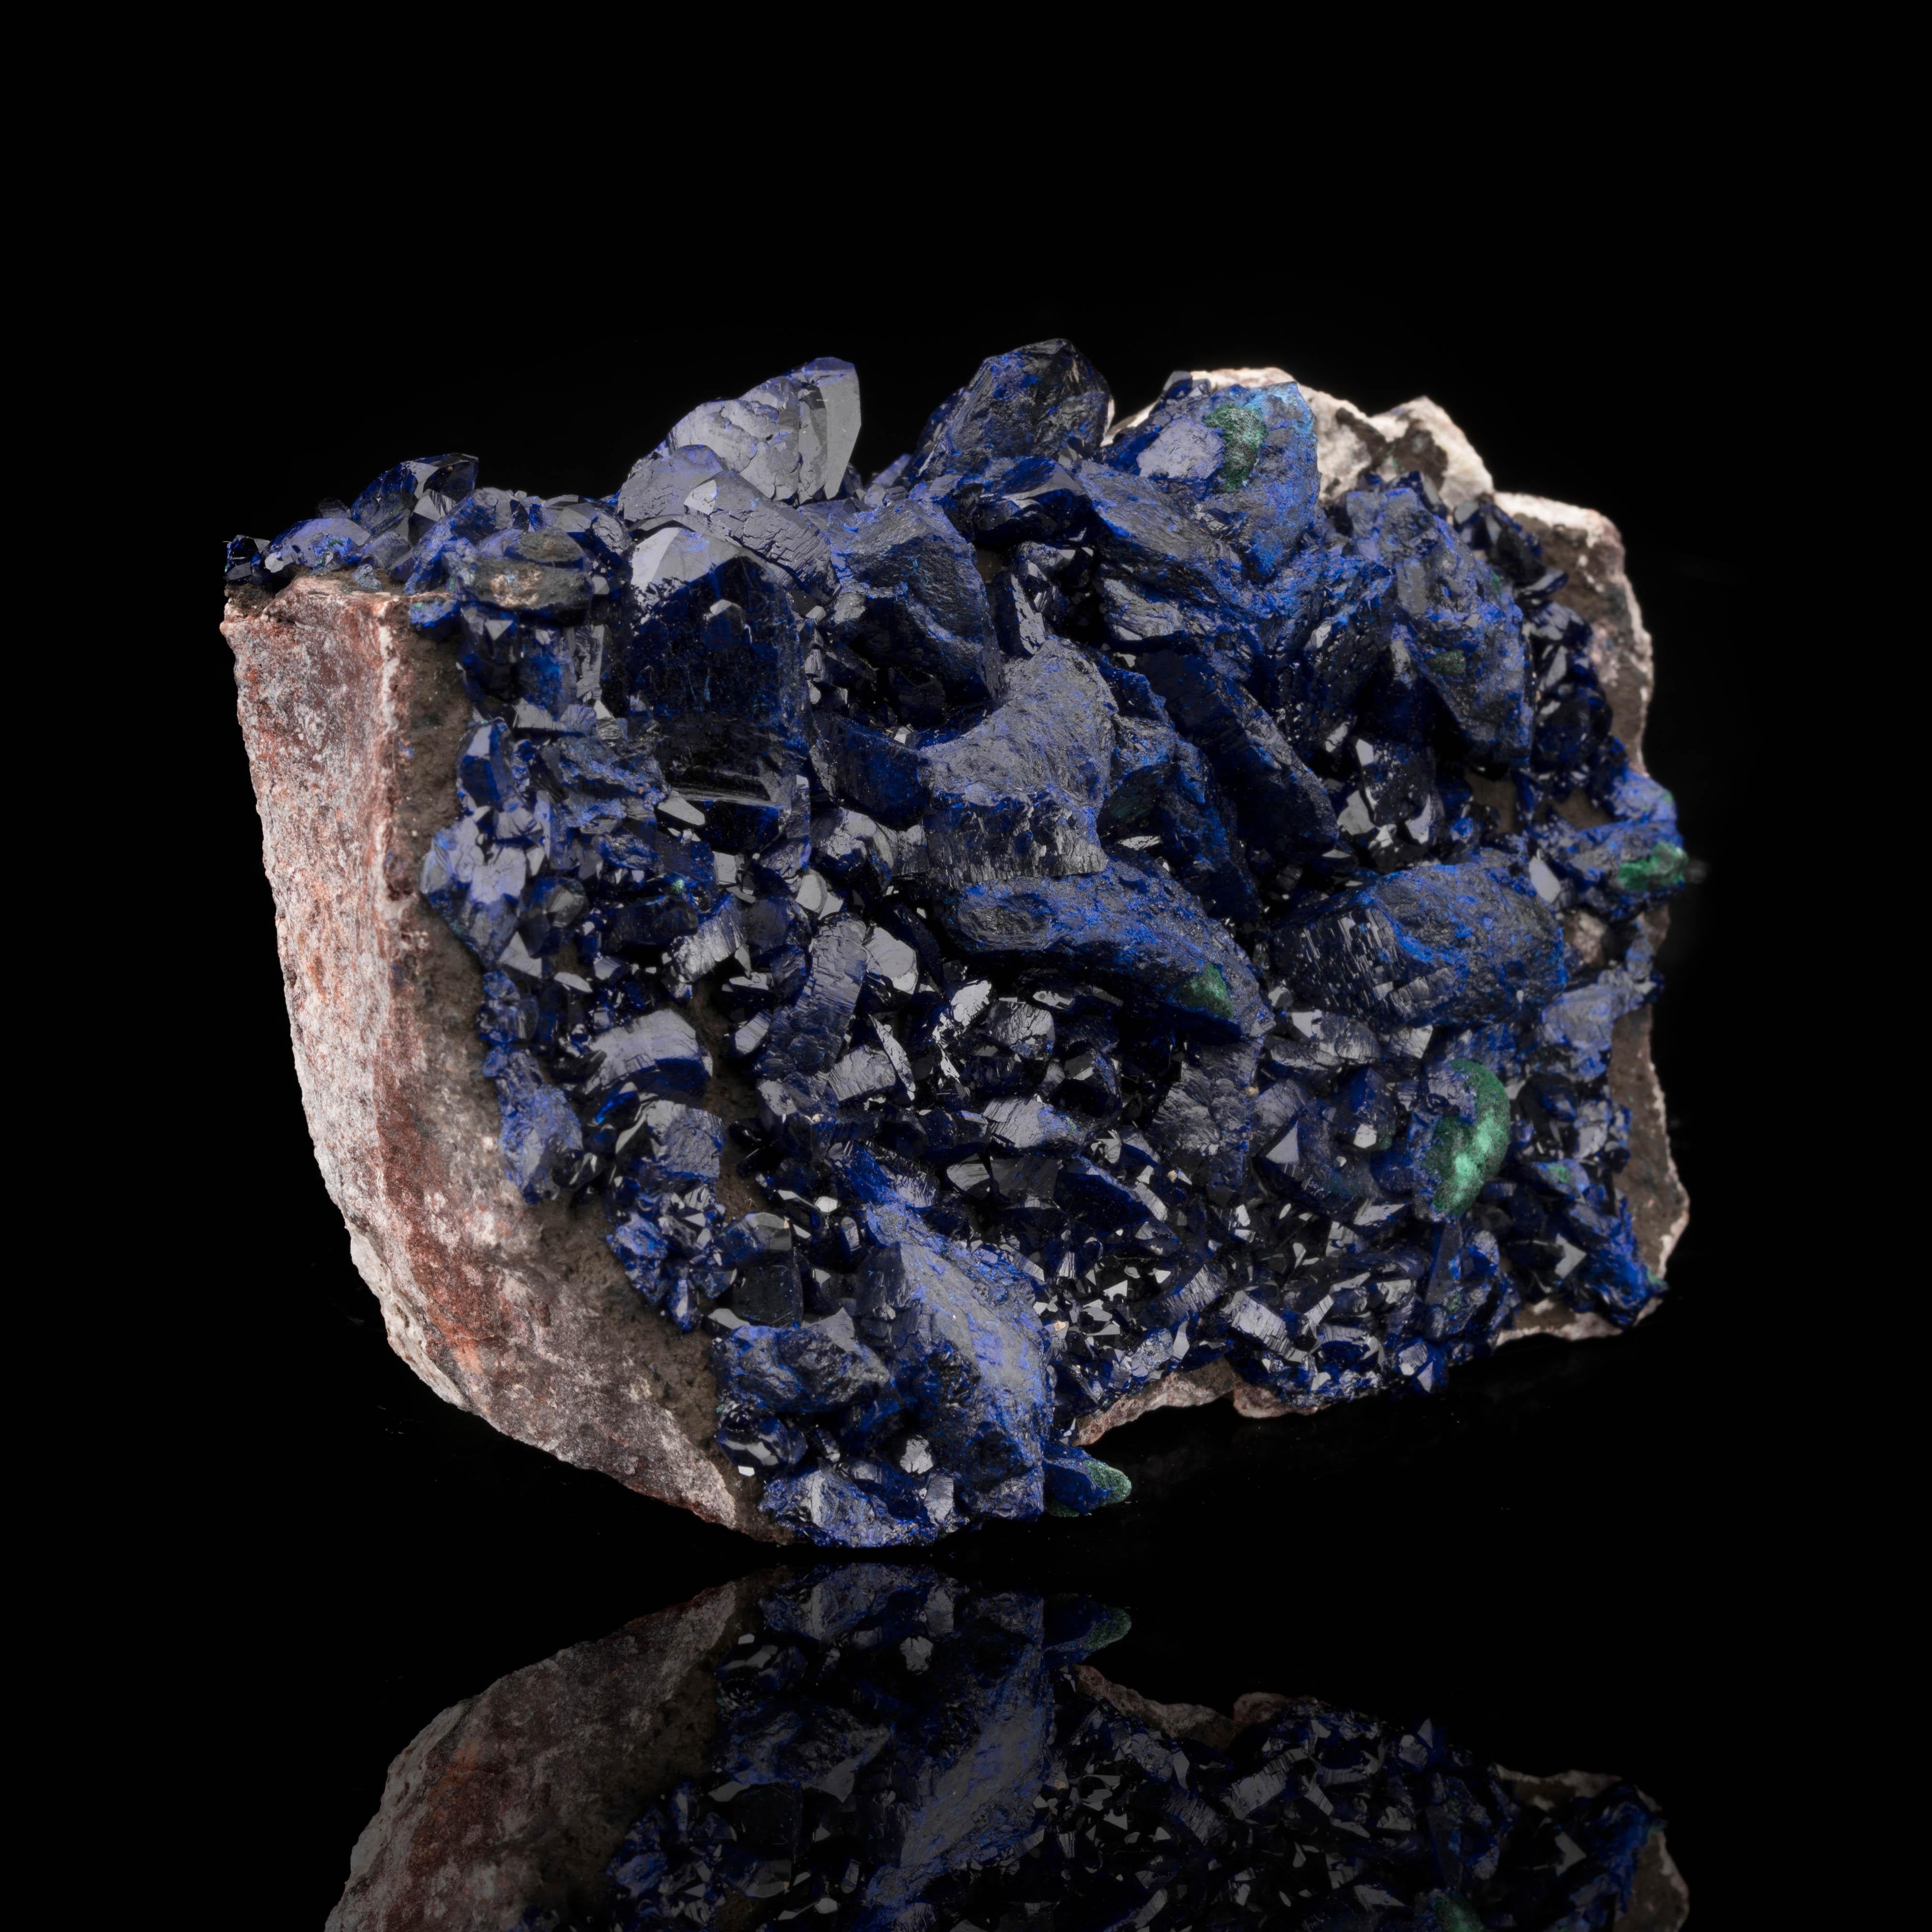 Azurites from the Milpillas mine in Zacatecas, Mexico are famous for their exceptional deep blue pigmentation and beautifully formed crystals. This significantly sized specimen of the rare secondary copper carbonate mineral features large, fully